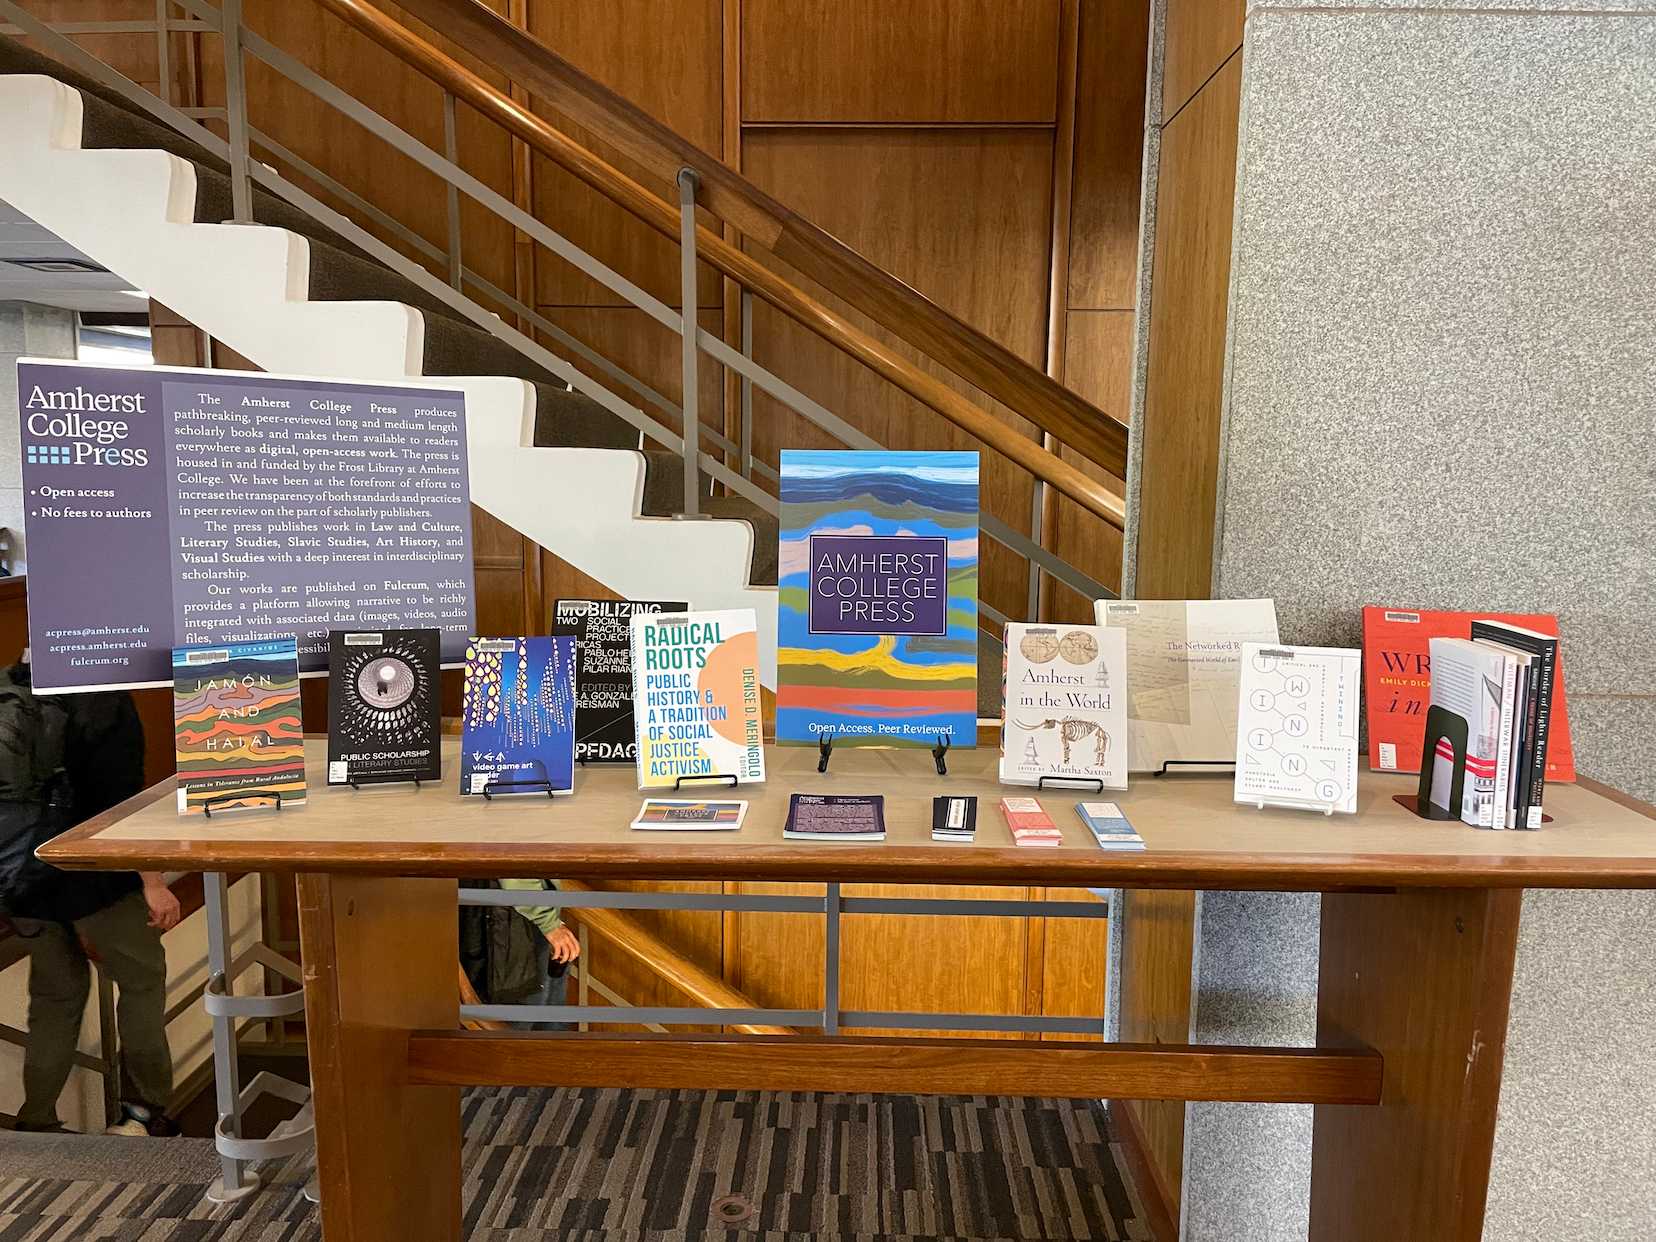 Books in stands and two posters with the words Amherst College Press sit on a table in front of stairs. 